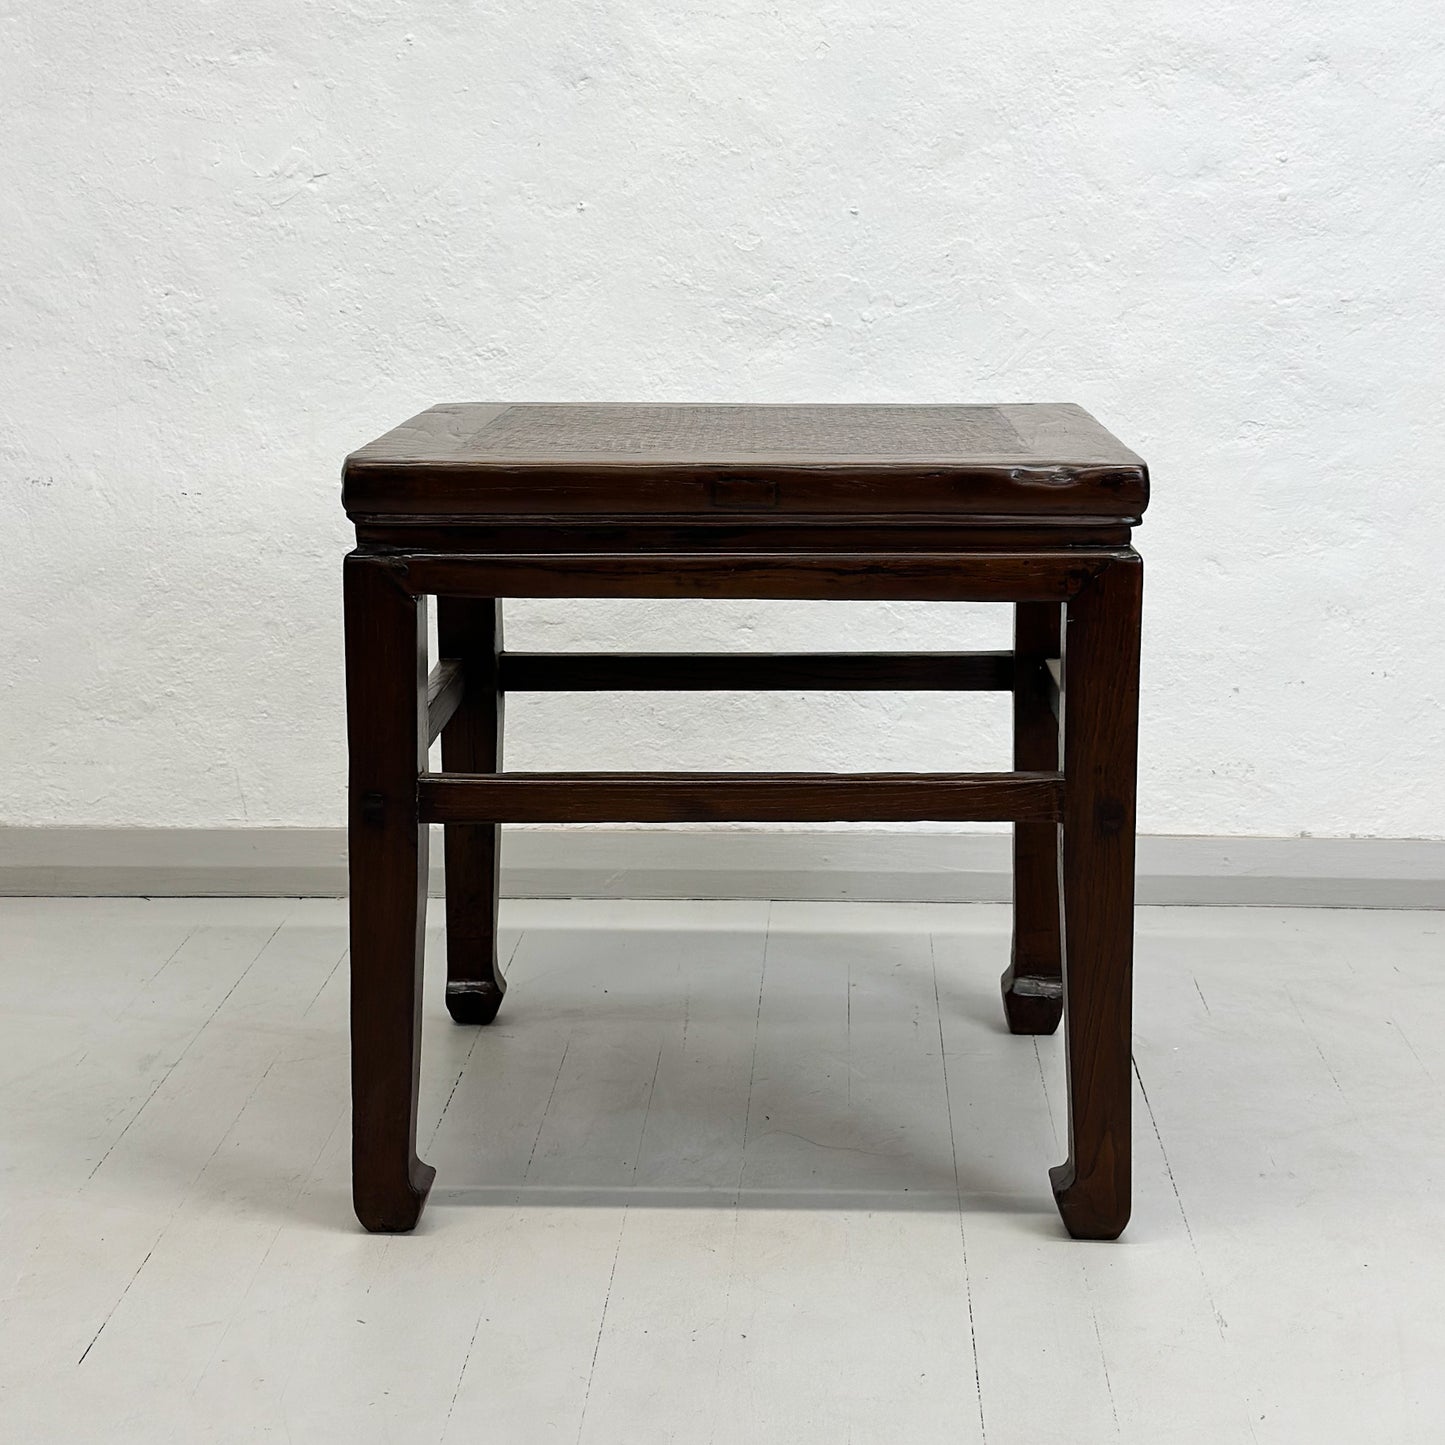 Vintage Rattan Inlay Side Table with Simple Stretcher Base